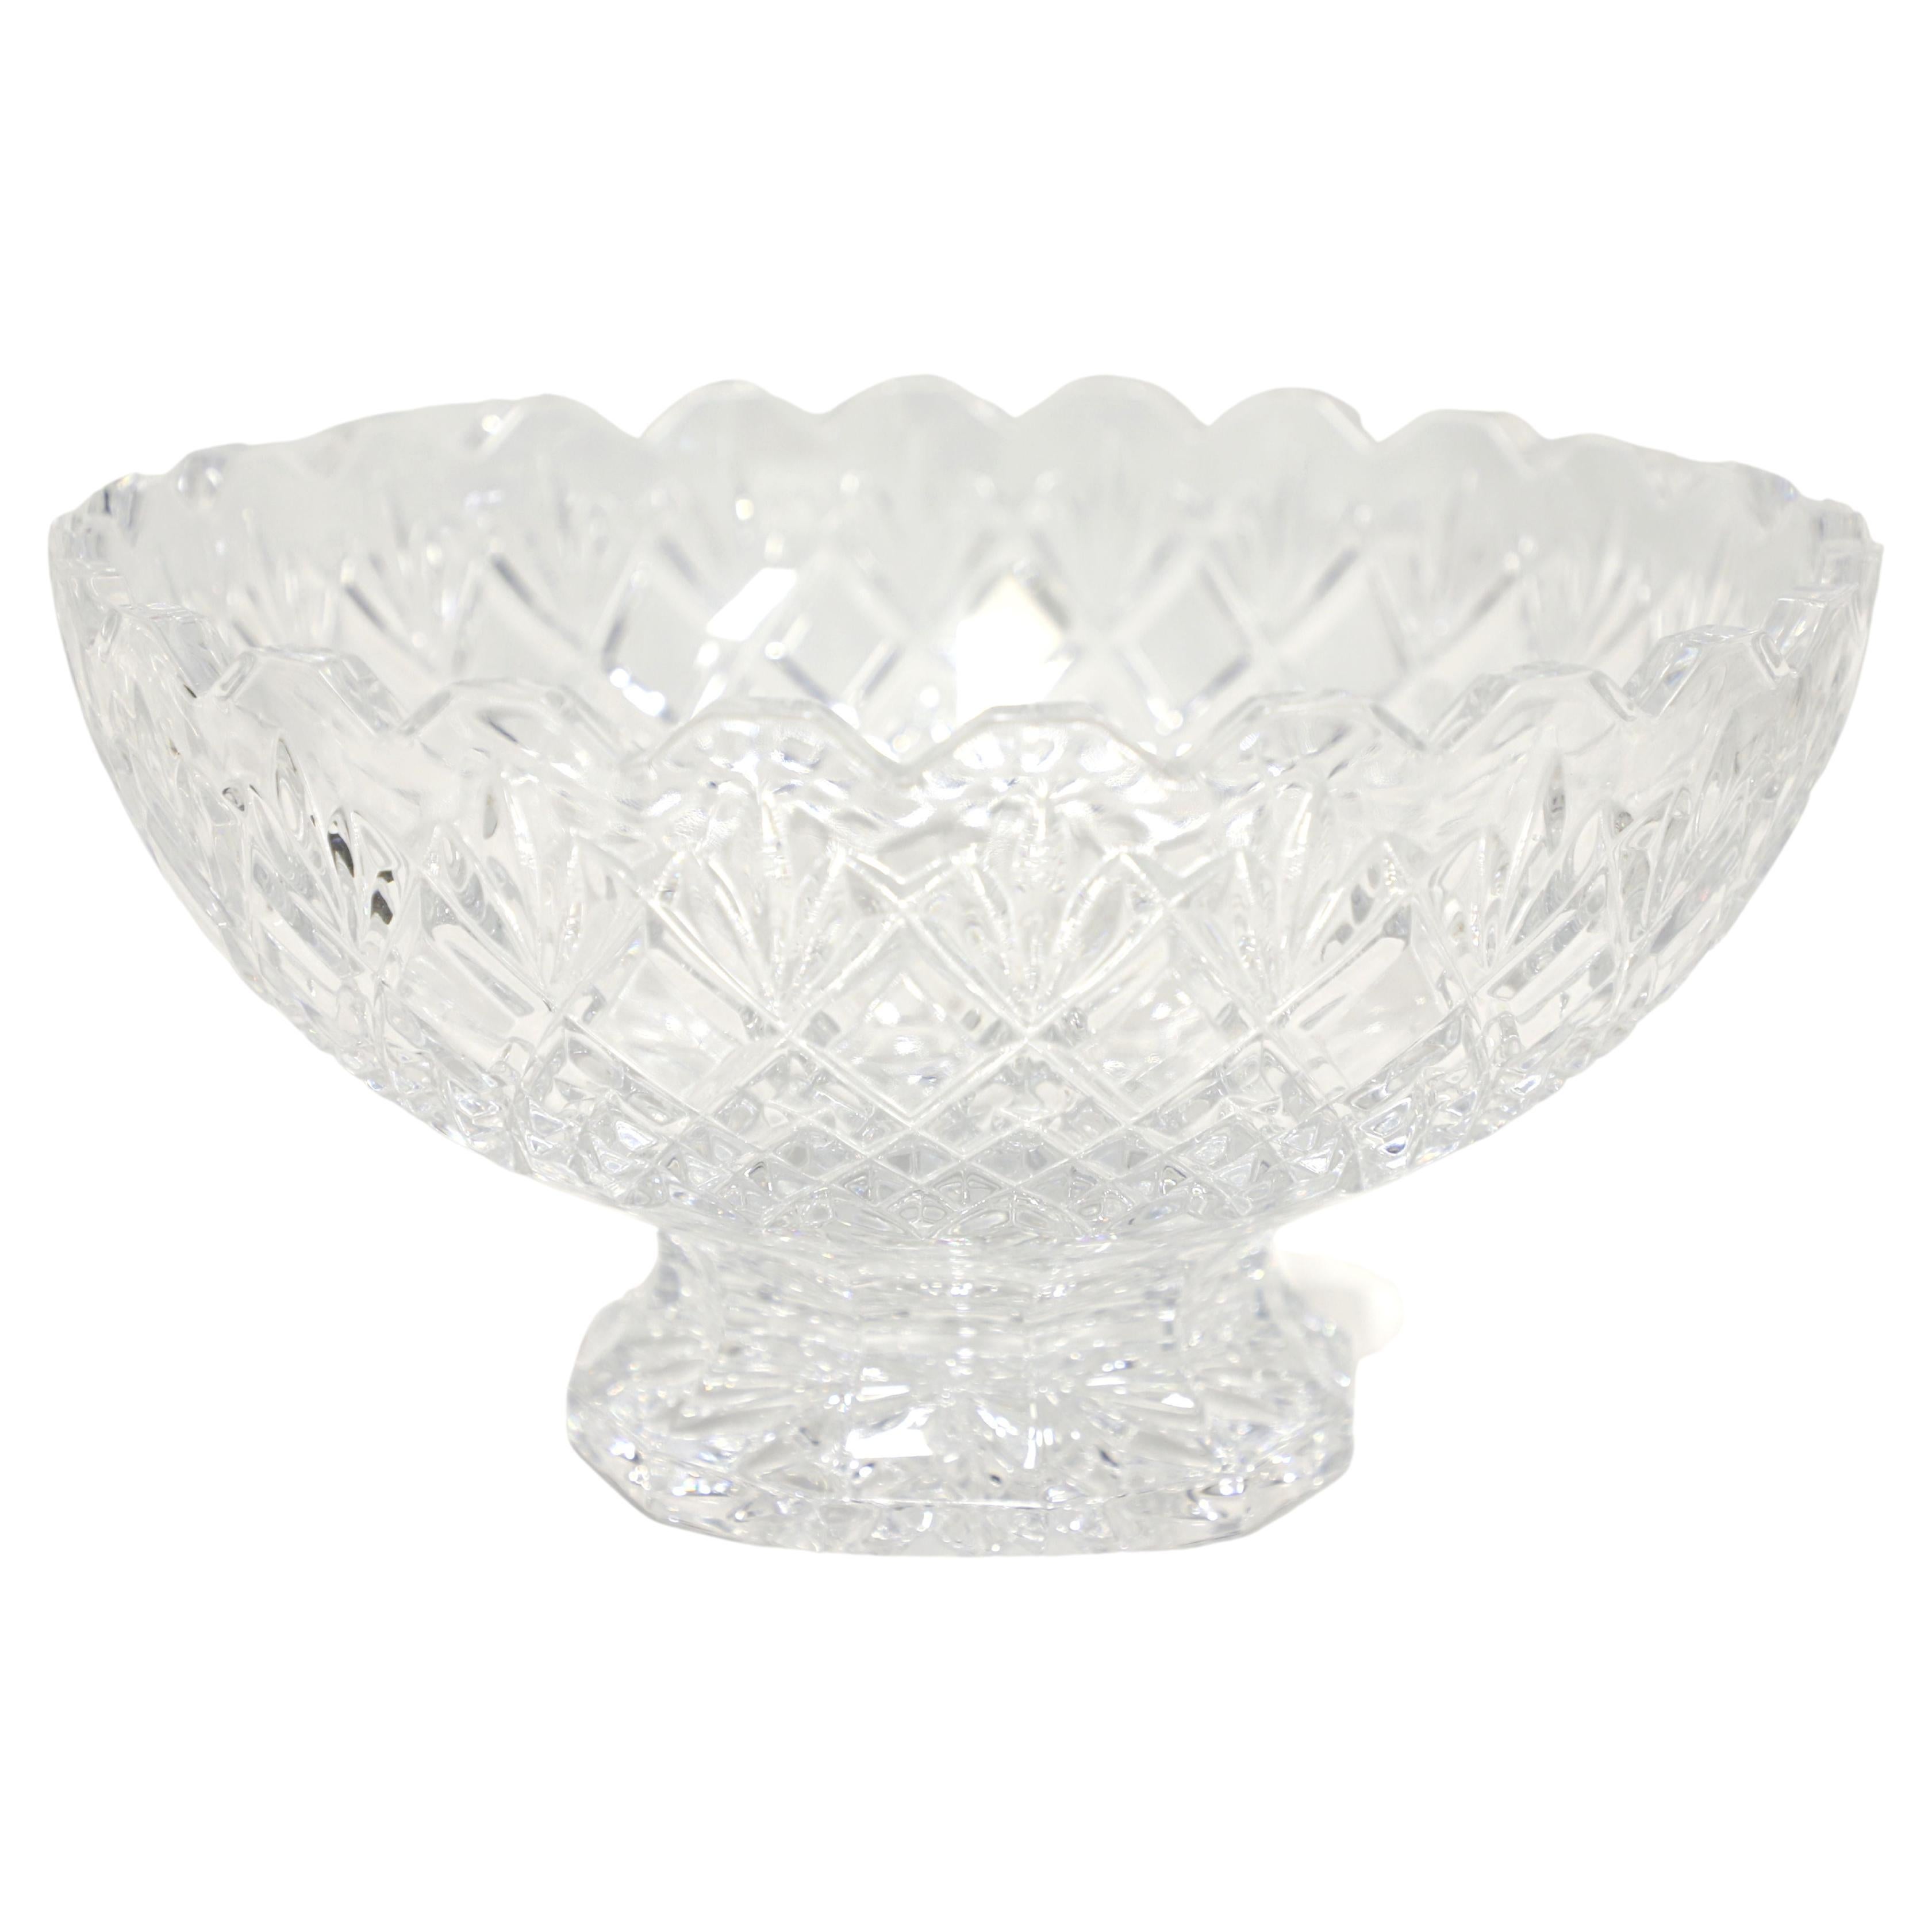 WATERFORD Crystal 10" Rosalee Sawtooth Edge Footed Bowl